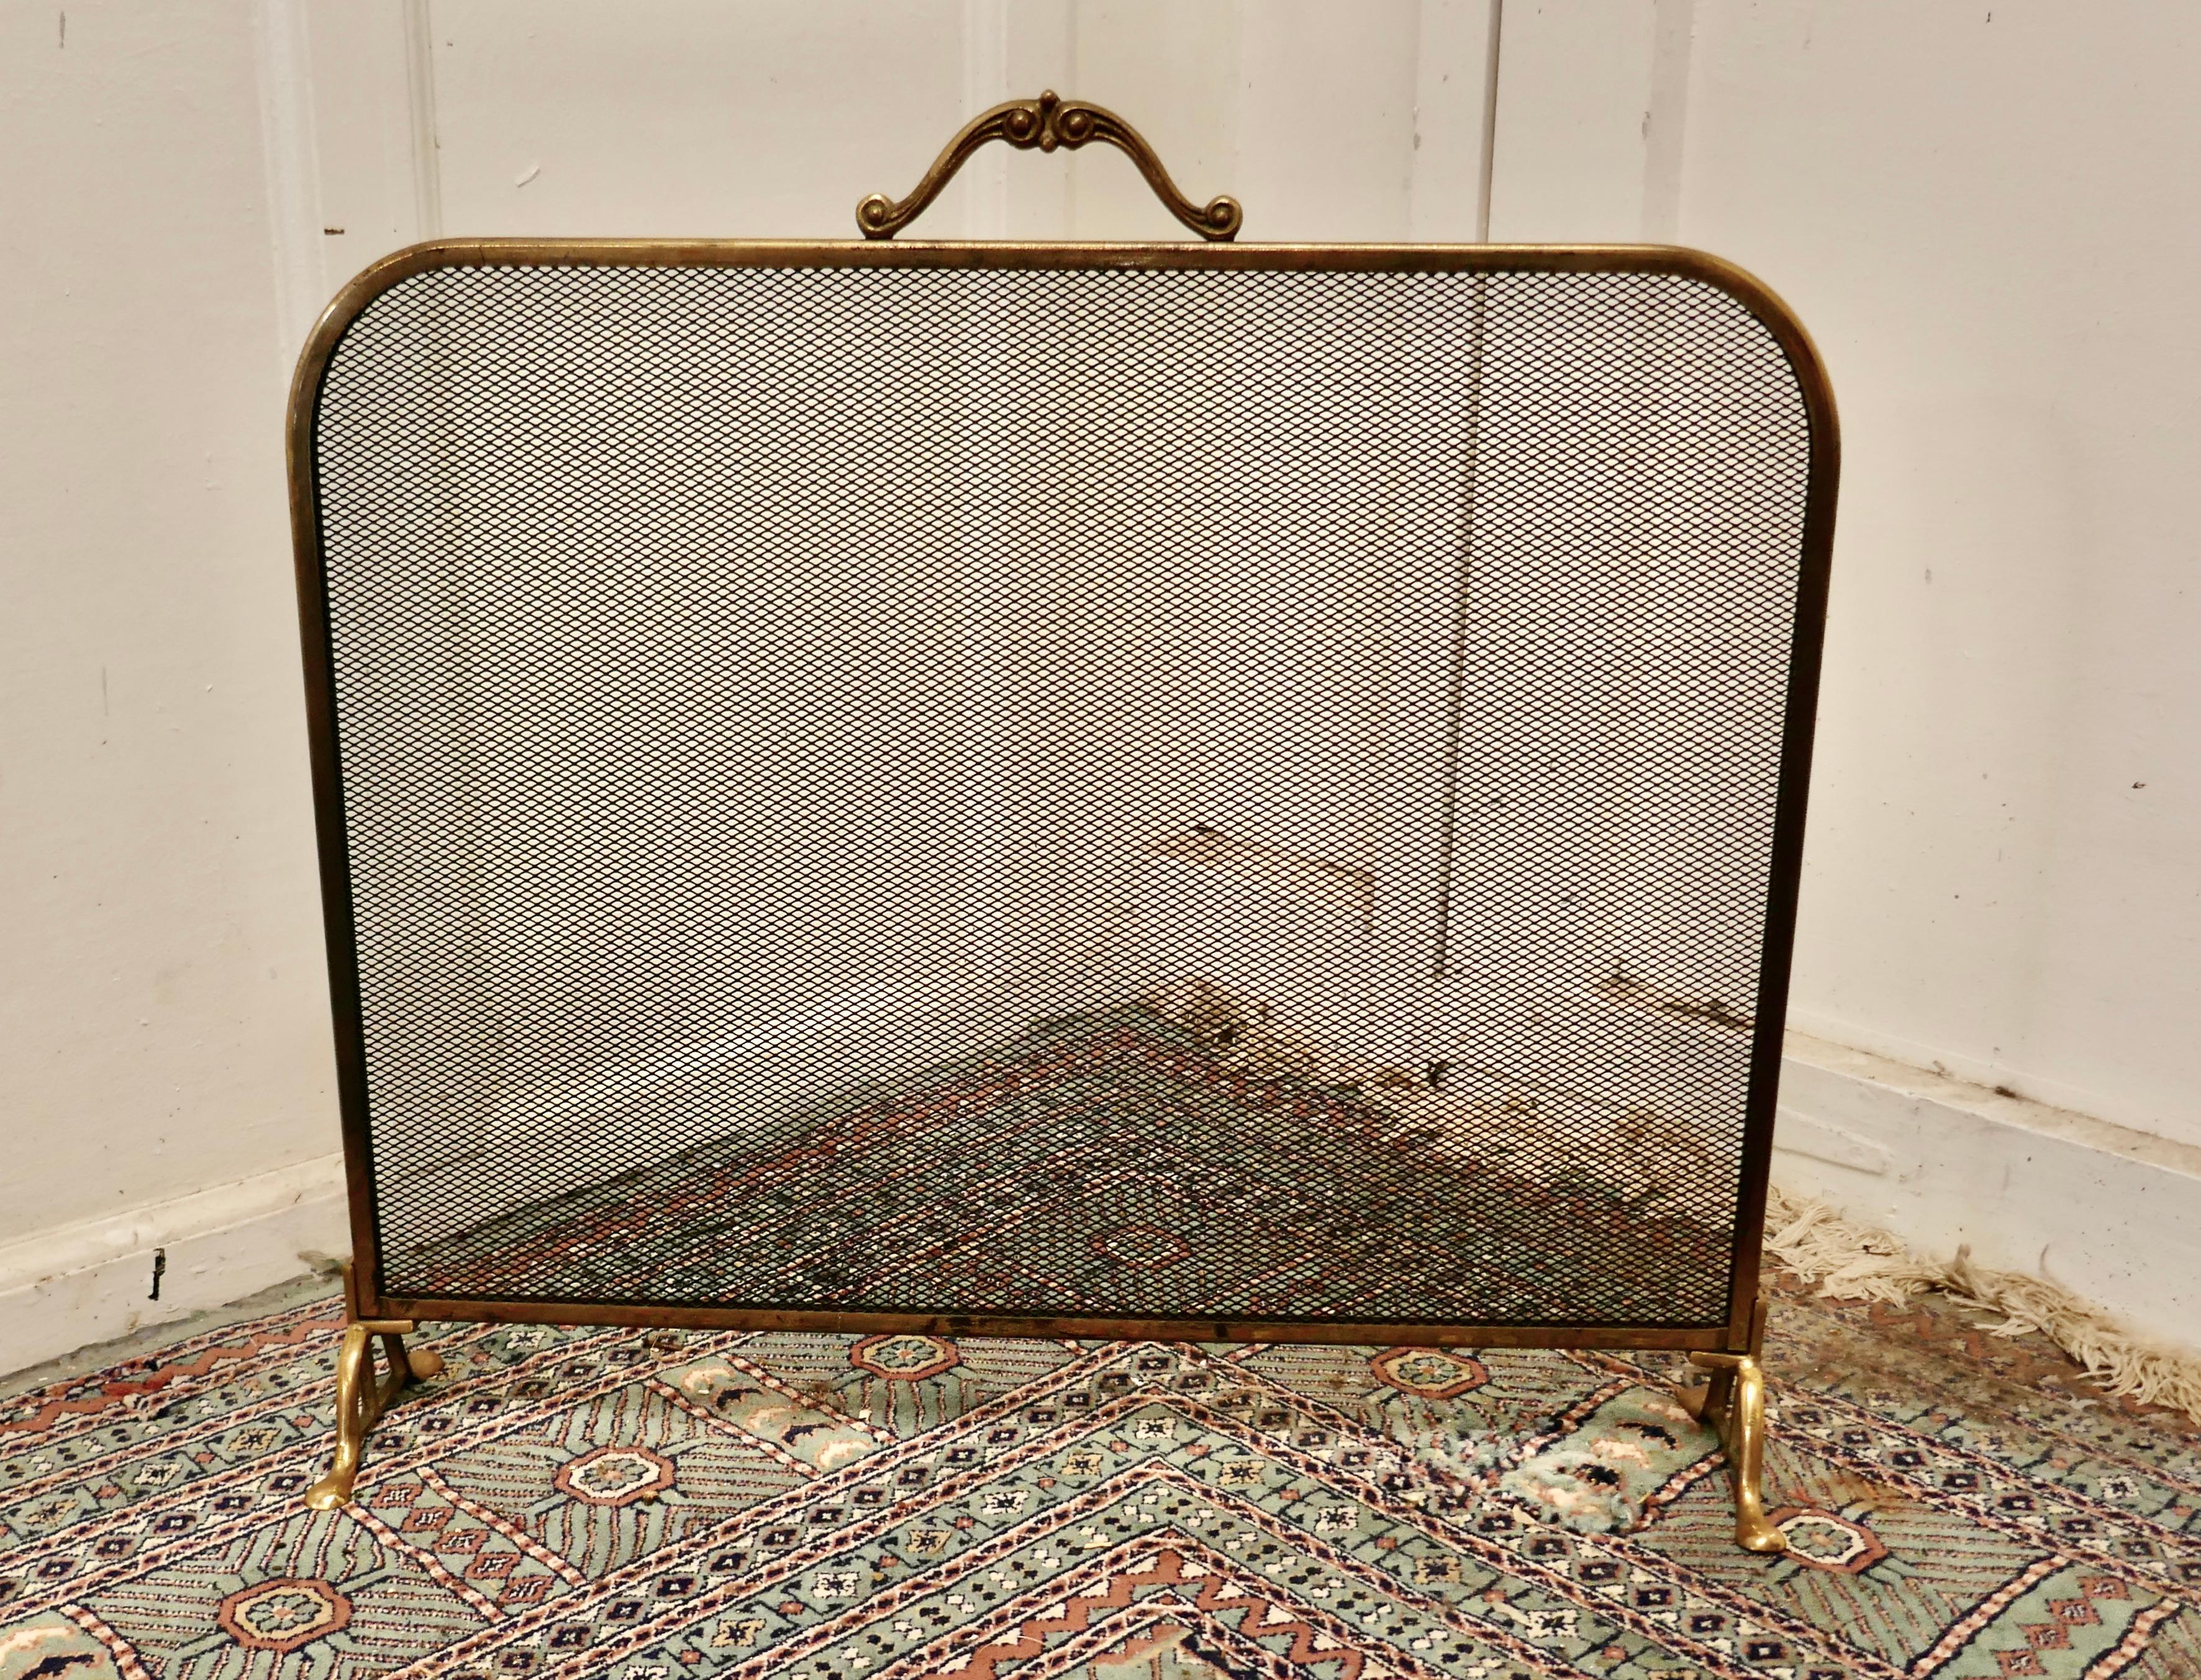 Arts and crafts brass and iron fire guard, spark screen

The Fire guard is a stylish good quality piece it is made in brass with a steel fine mesh screen and has a handle to the top
A delightful decorative piece which is very practical and ready